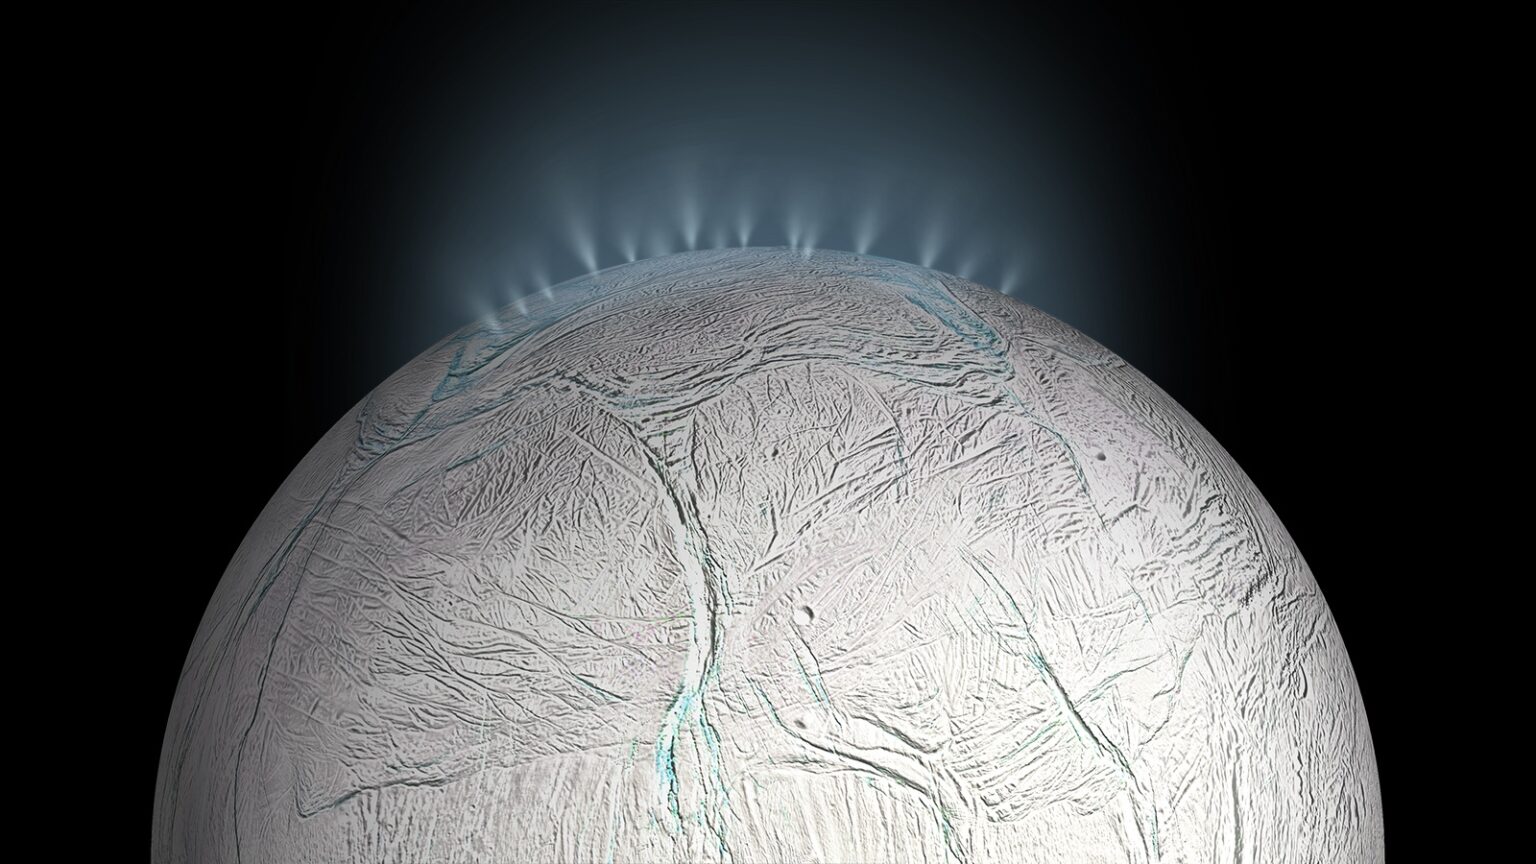 Scientists think that Saturn's moon Enceladus is a likely candidate for hosting alien life. Fresh ice found on the surface unveils the latest discovery.